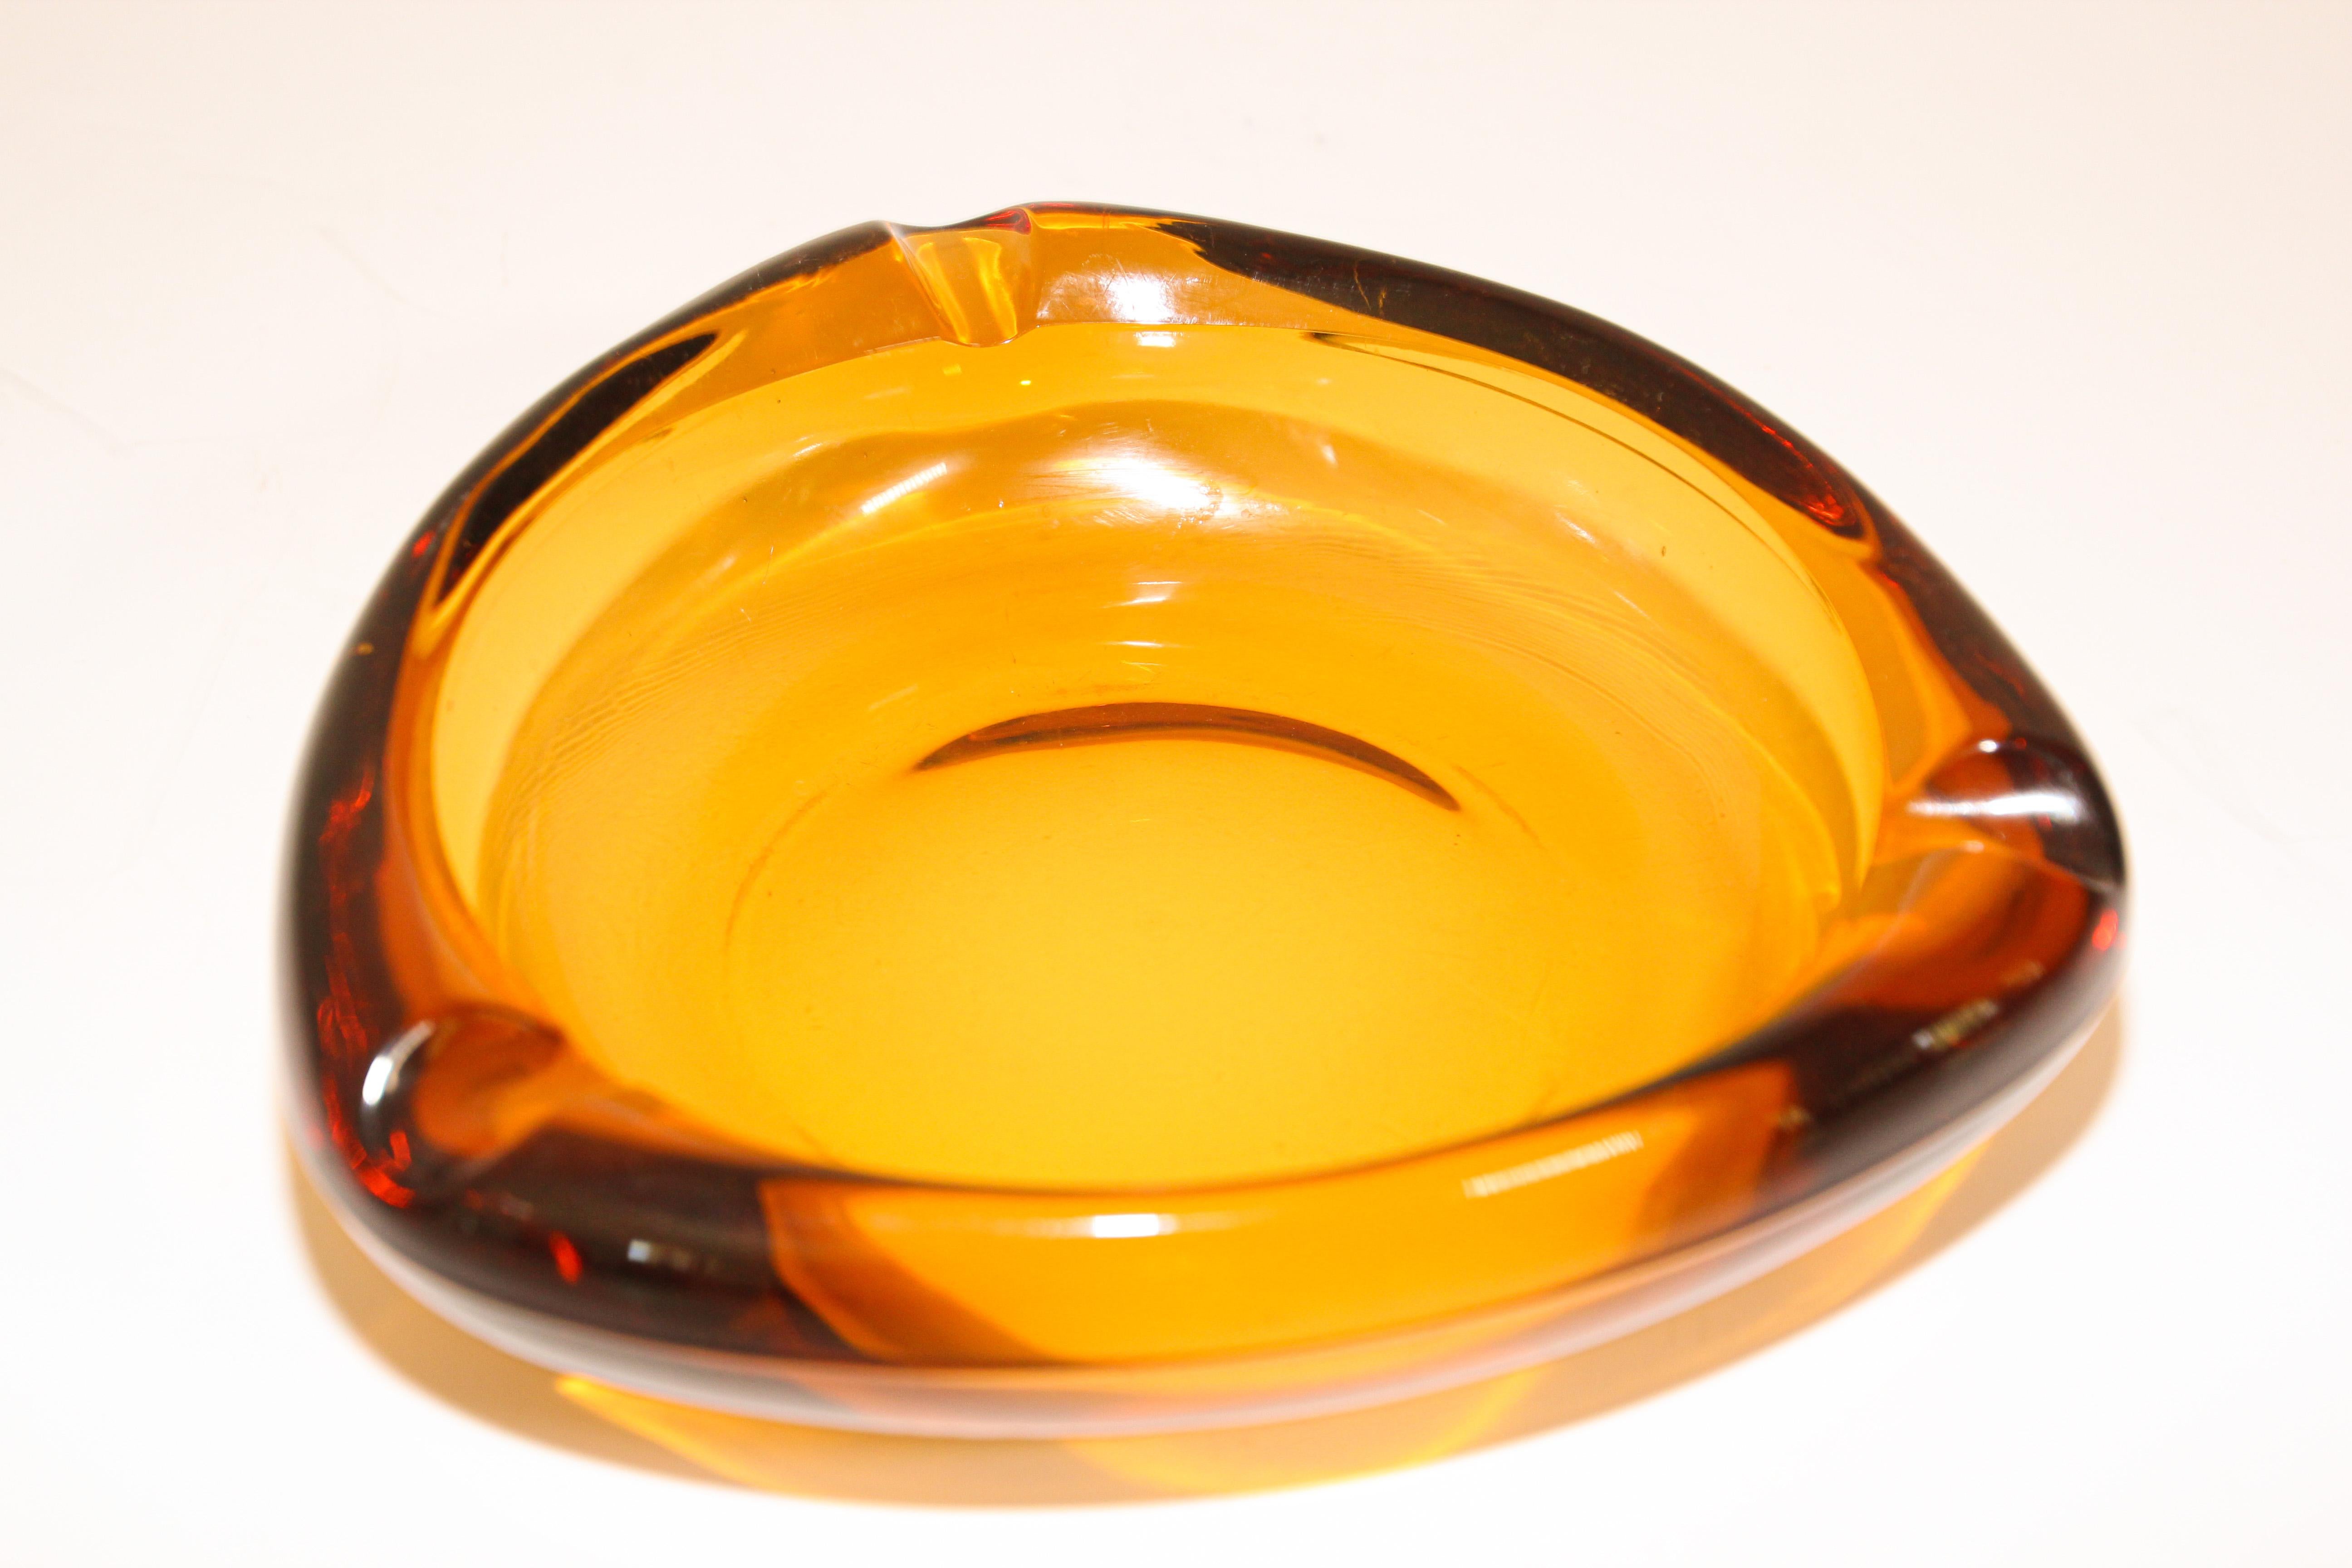 Moroccan amber glass ashtrays from the 1950s.
Vintage hazel atlas Moroccan amber glass ashtray in a triangle shape.
In excellent condition, great amber glass.
A great addition to any retro or Mid-Century Modern decor.
Measures: 8